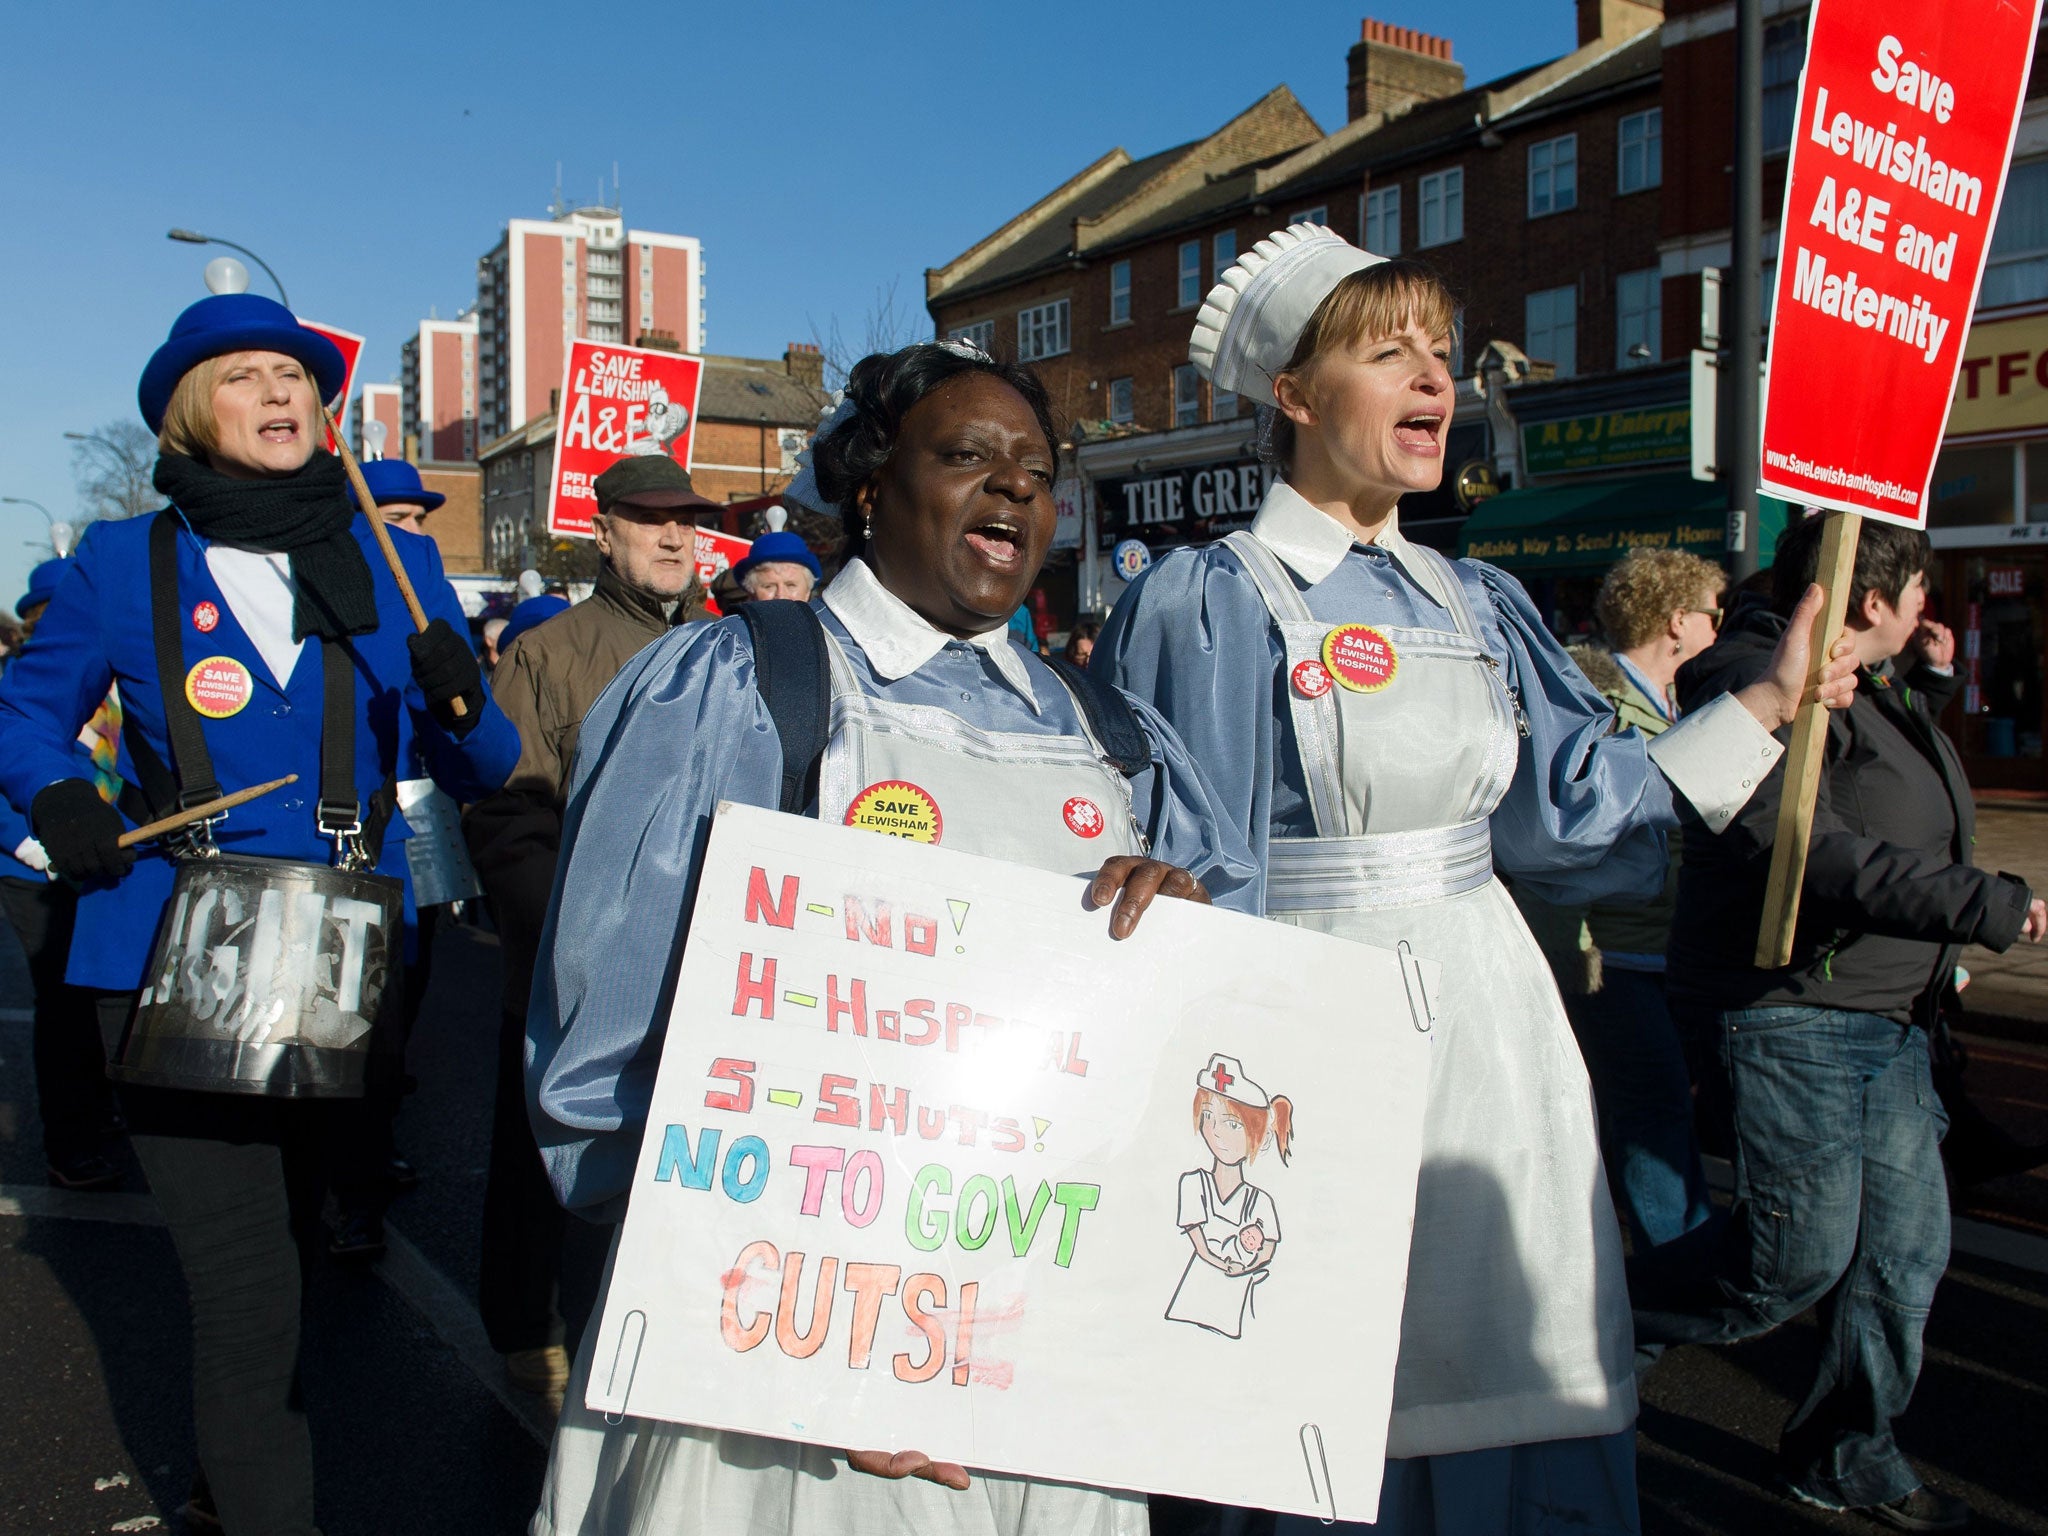 The ‘Save Lewisham’ protests have led to a compromise